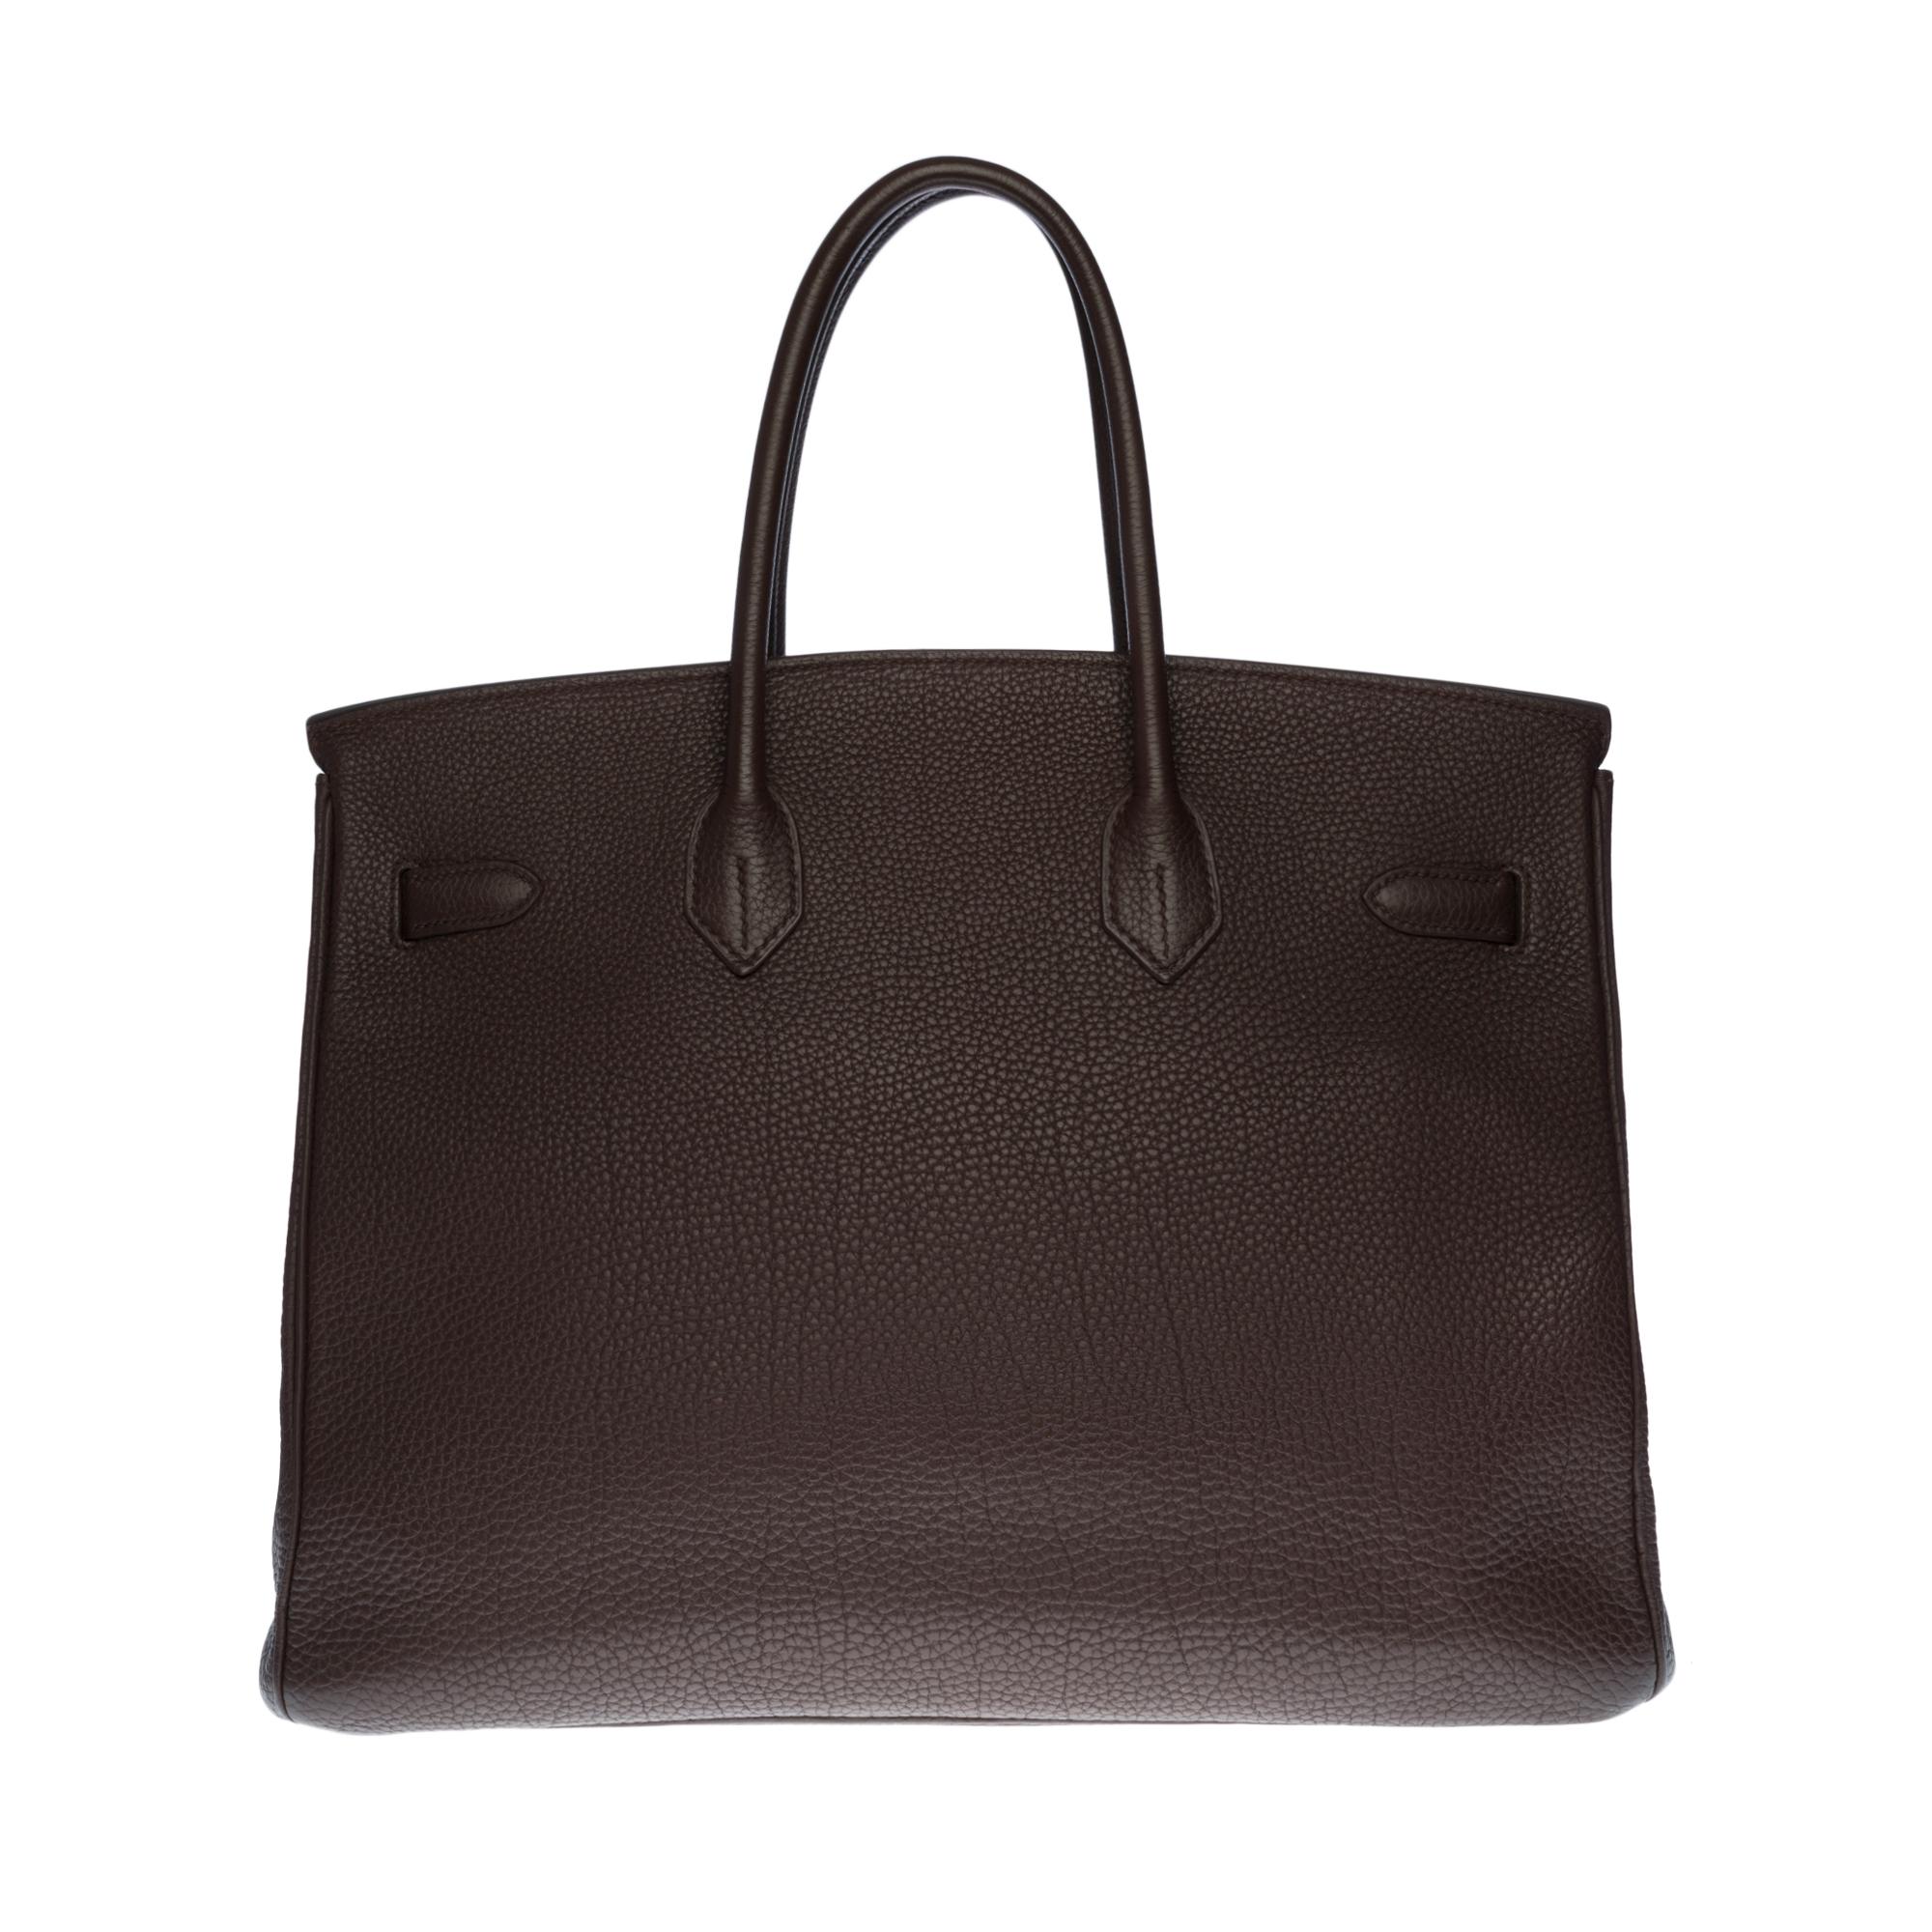 Beautiful Hermes Birkin 35 cm handbag in brown Togo leather, silver metal palladium hardware, double brown leather handle allowing a handheld
Flap closure
Lining in brown leather, one zip pocket, one patch pocket
Signature: 